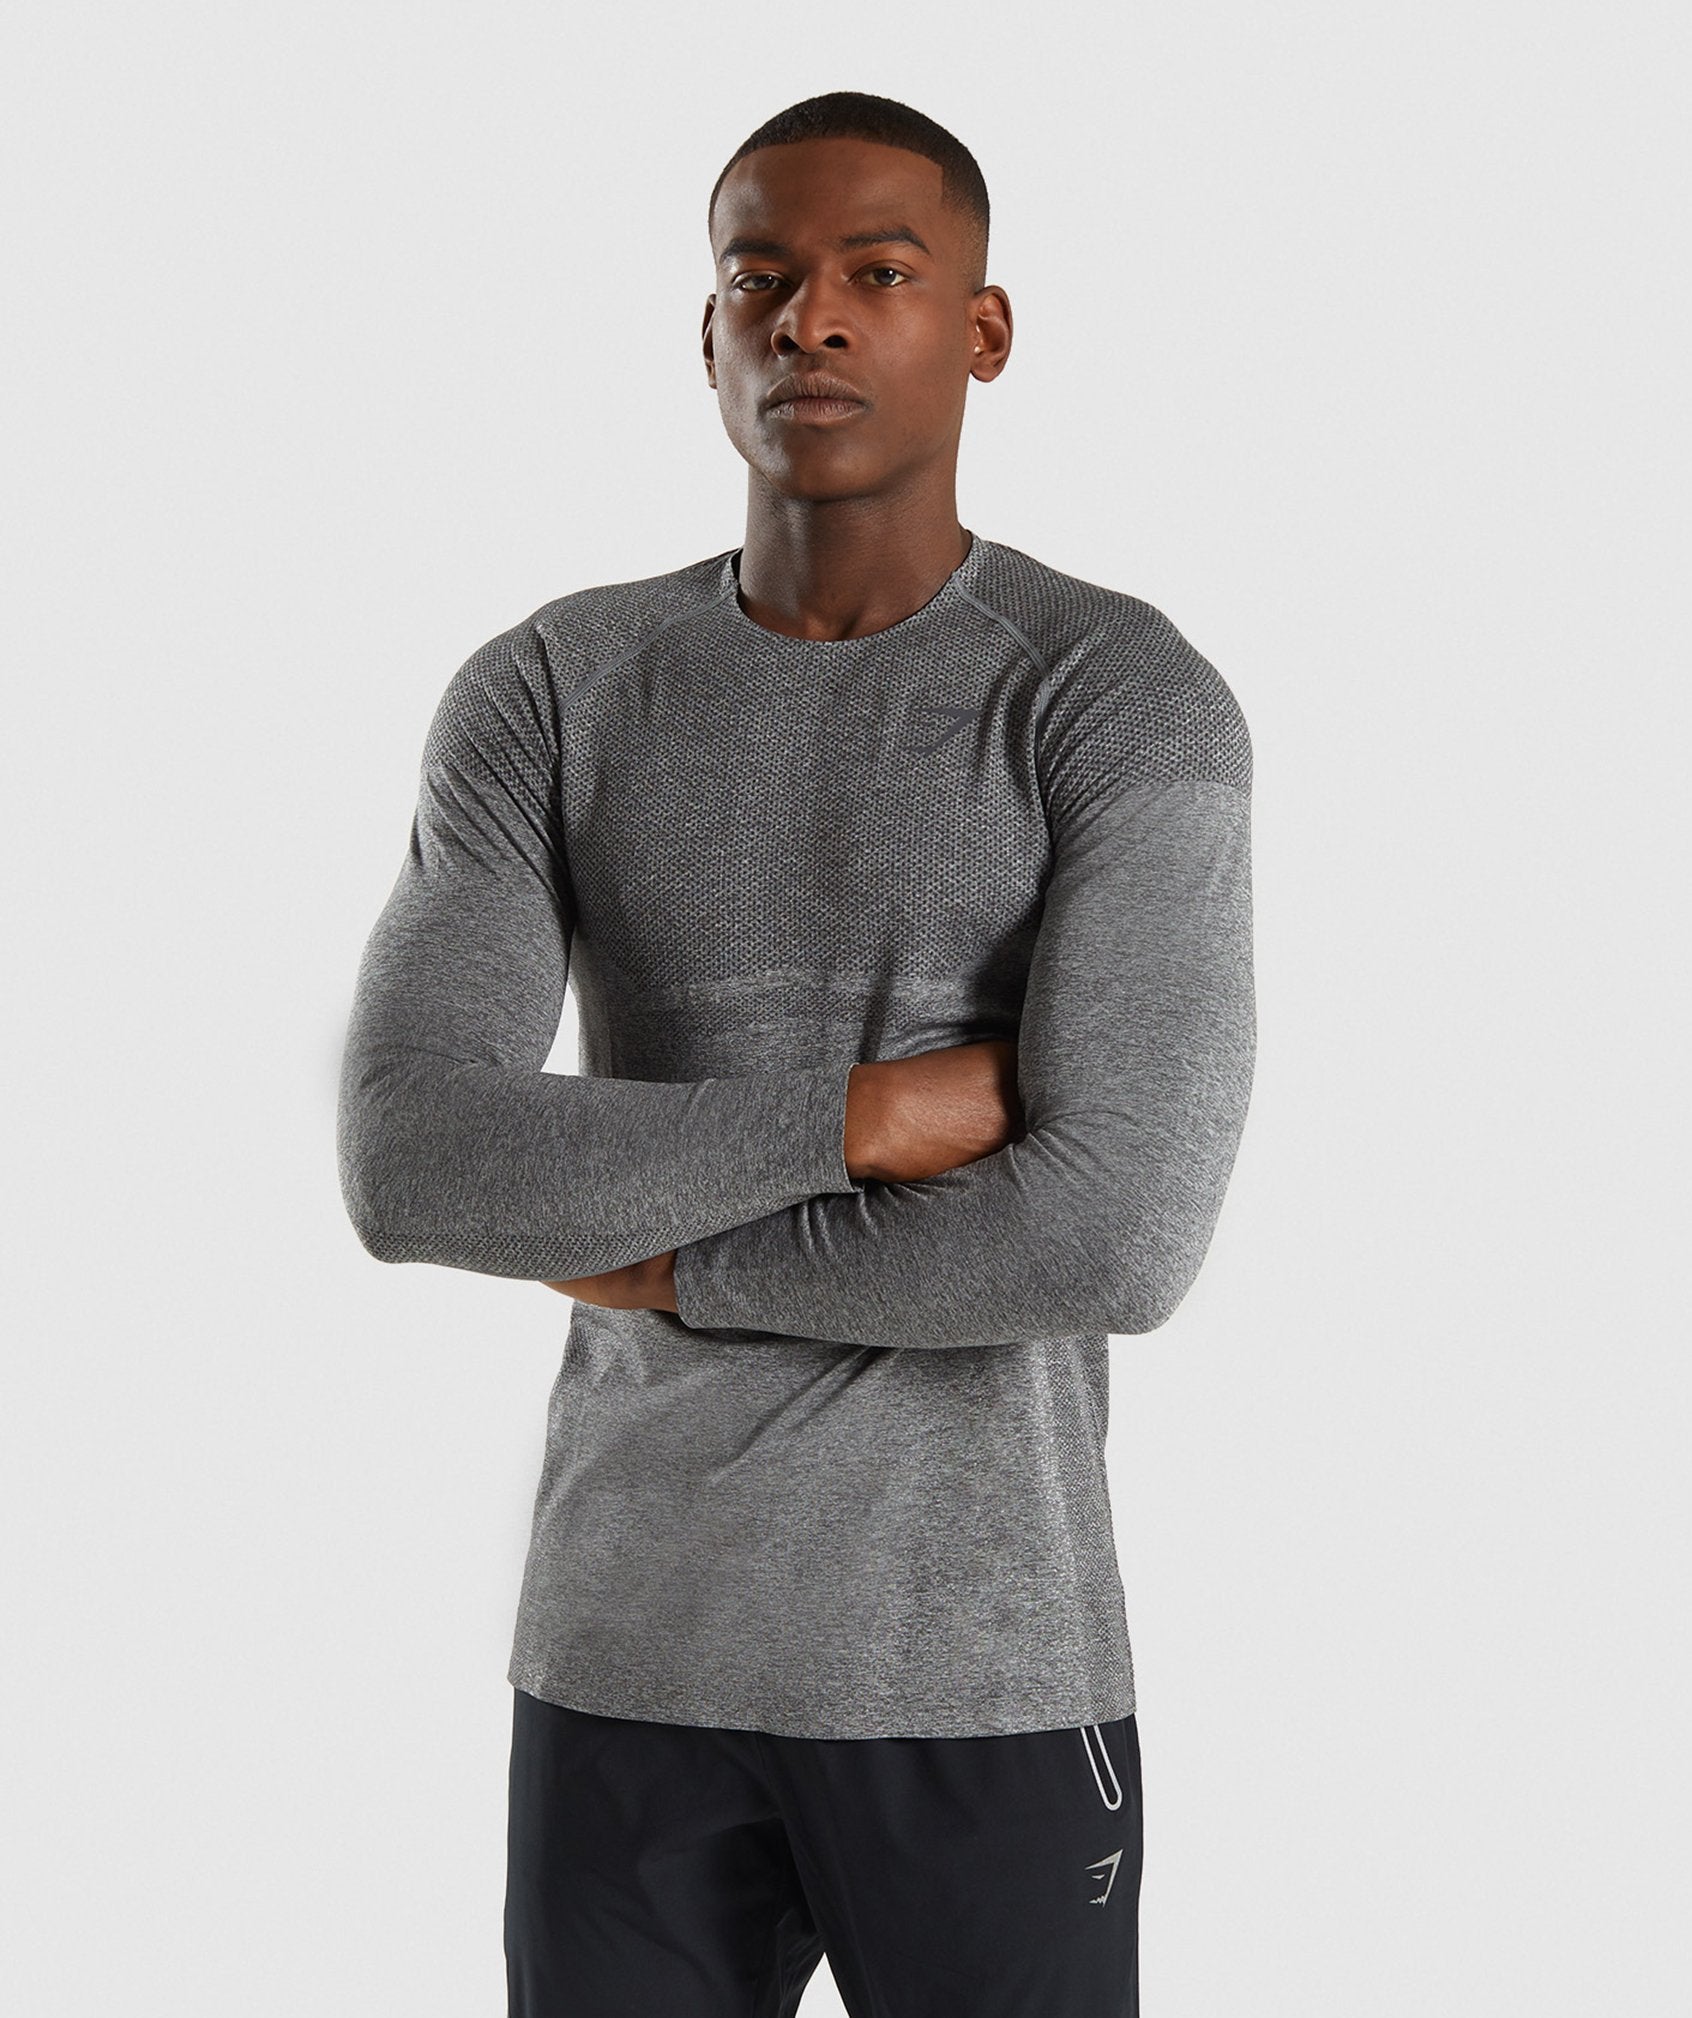 Shadow X Seamless Long Sleeve T-Shirt in Charcoal Marl - view 1